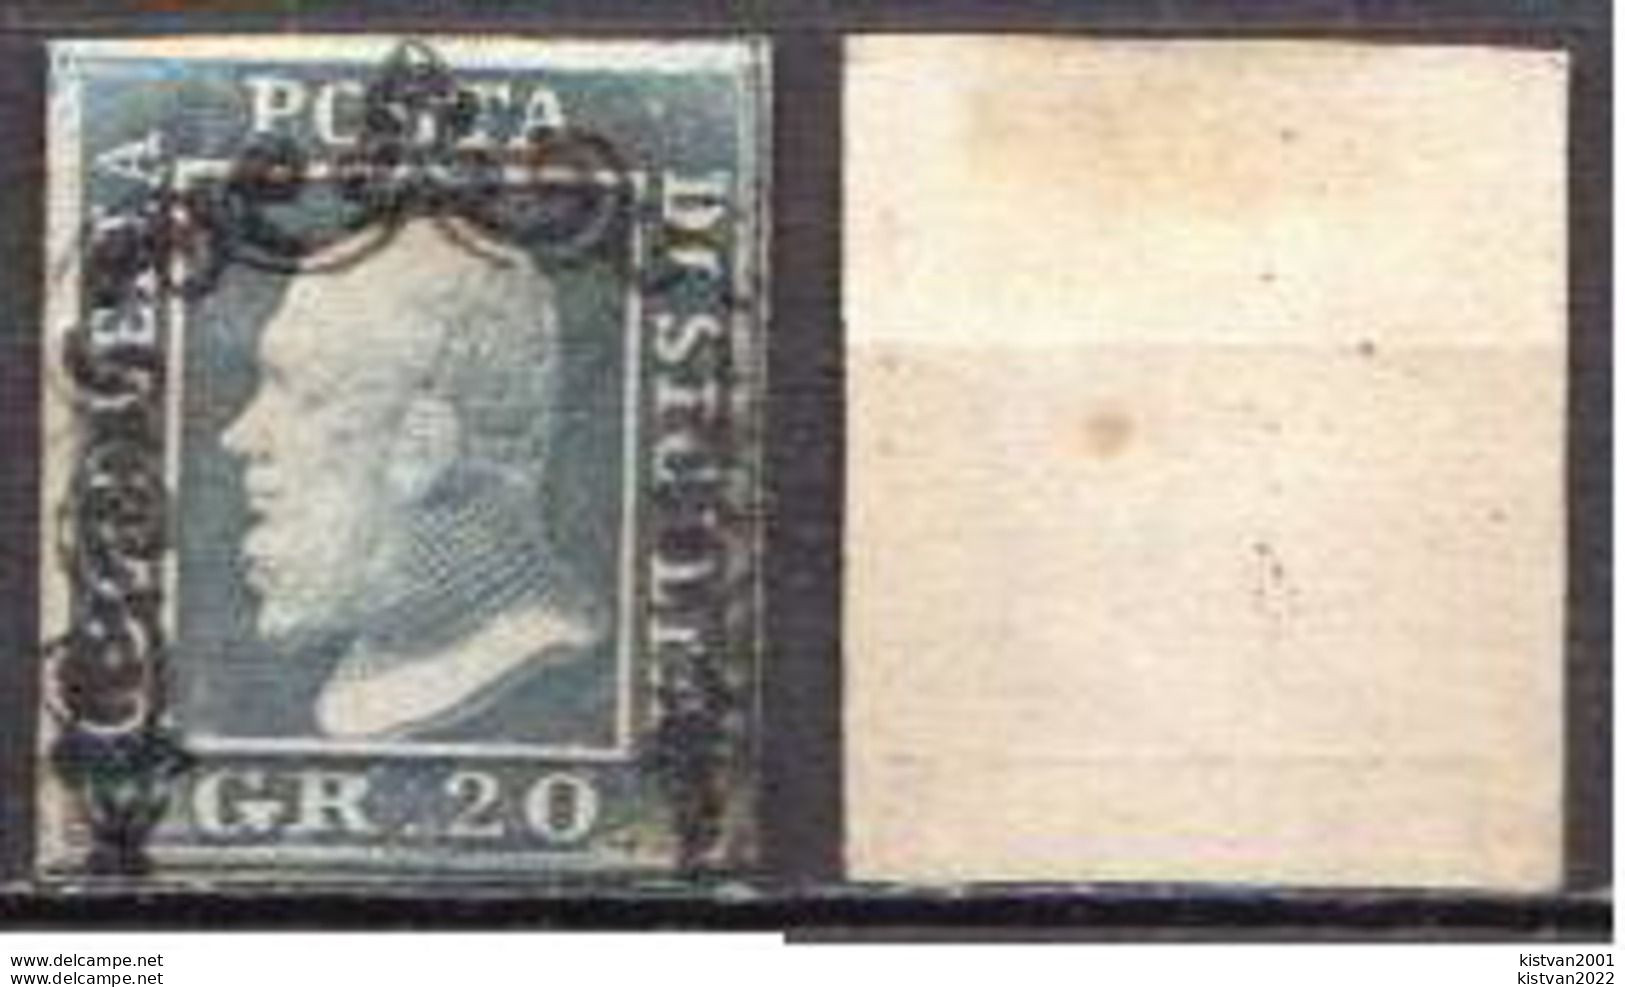 Italy Used Stamp, I Don't Know If Is It Original Or Not, FORGERY??? - Sicile